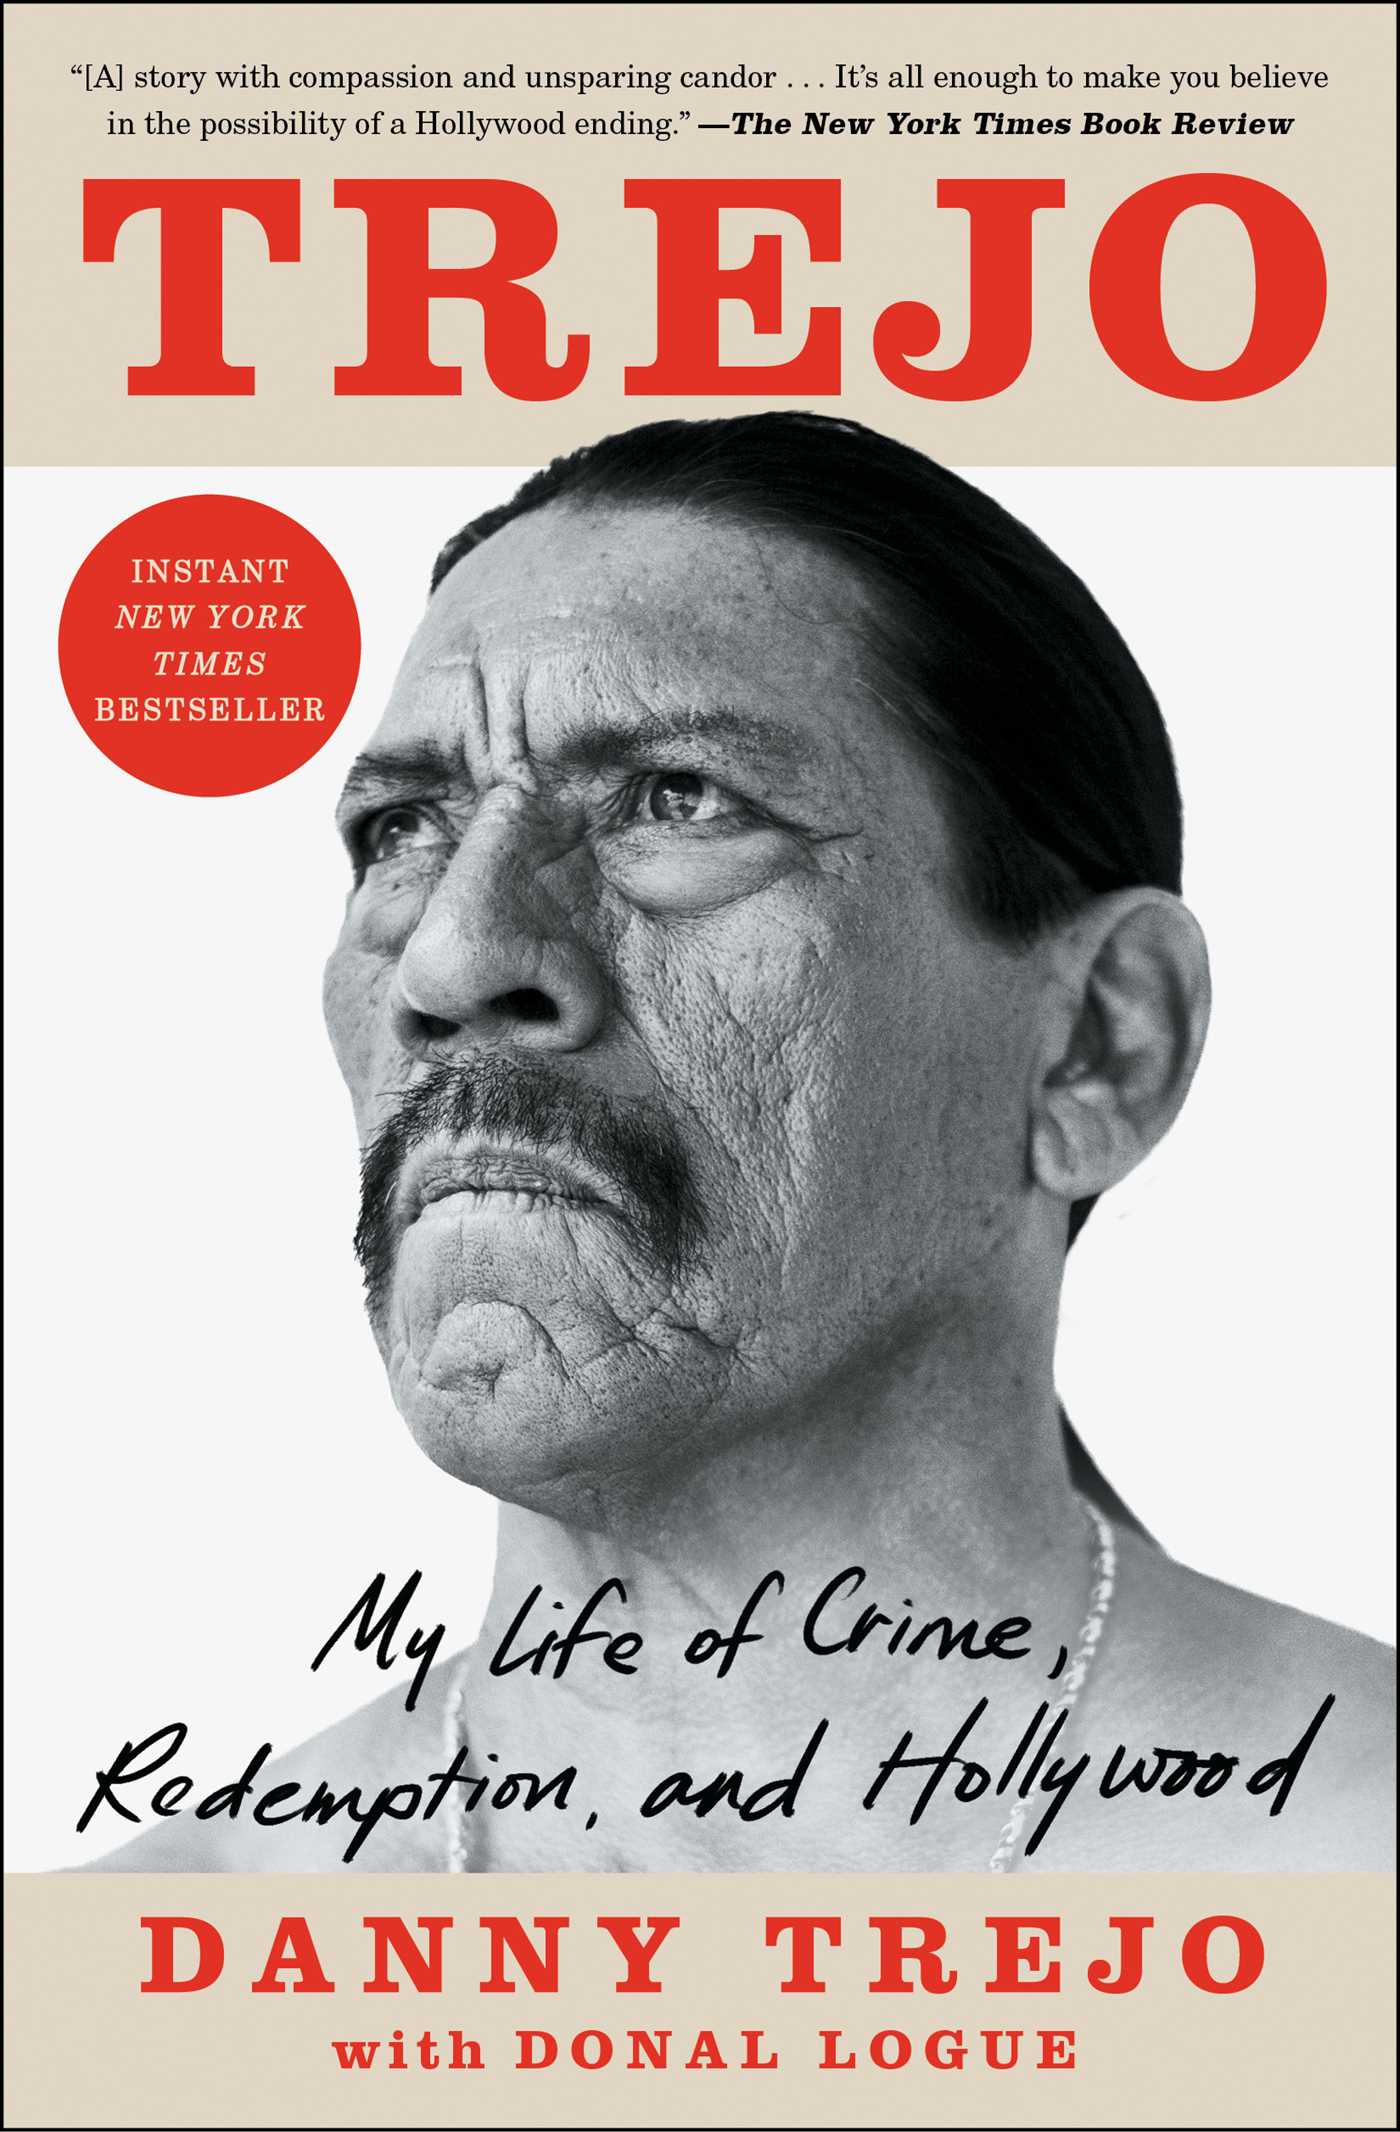 Image of book cover by danny trejo